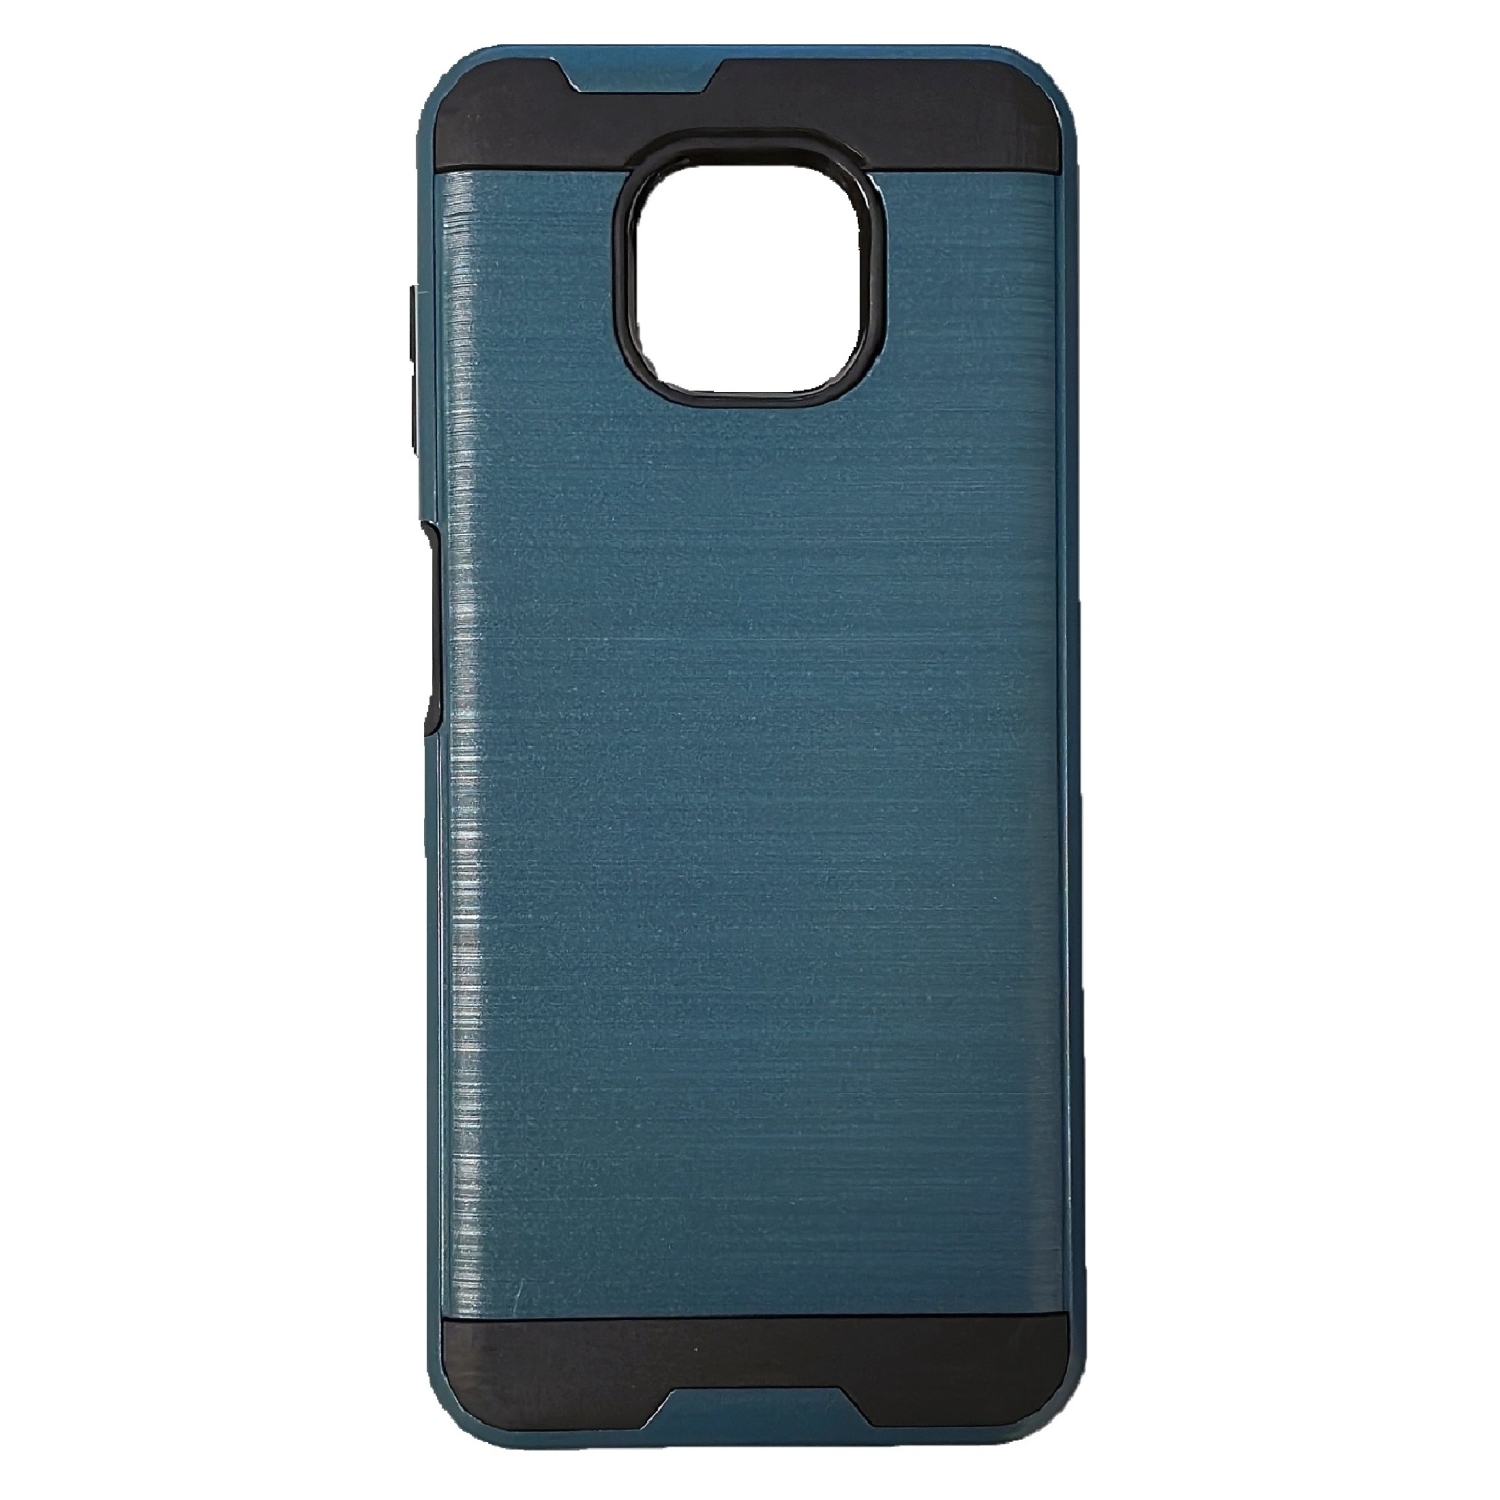 TopSave Blushed Texture PC+TPU Hard Rugged Cover Case For Motorola Moto G Power(2021), Navy Blue